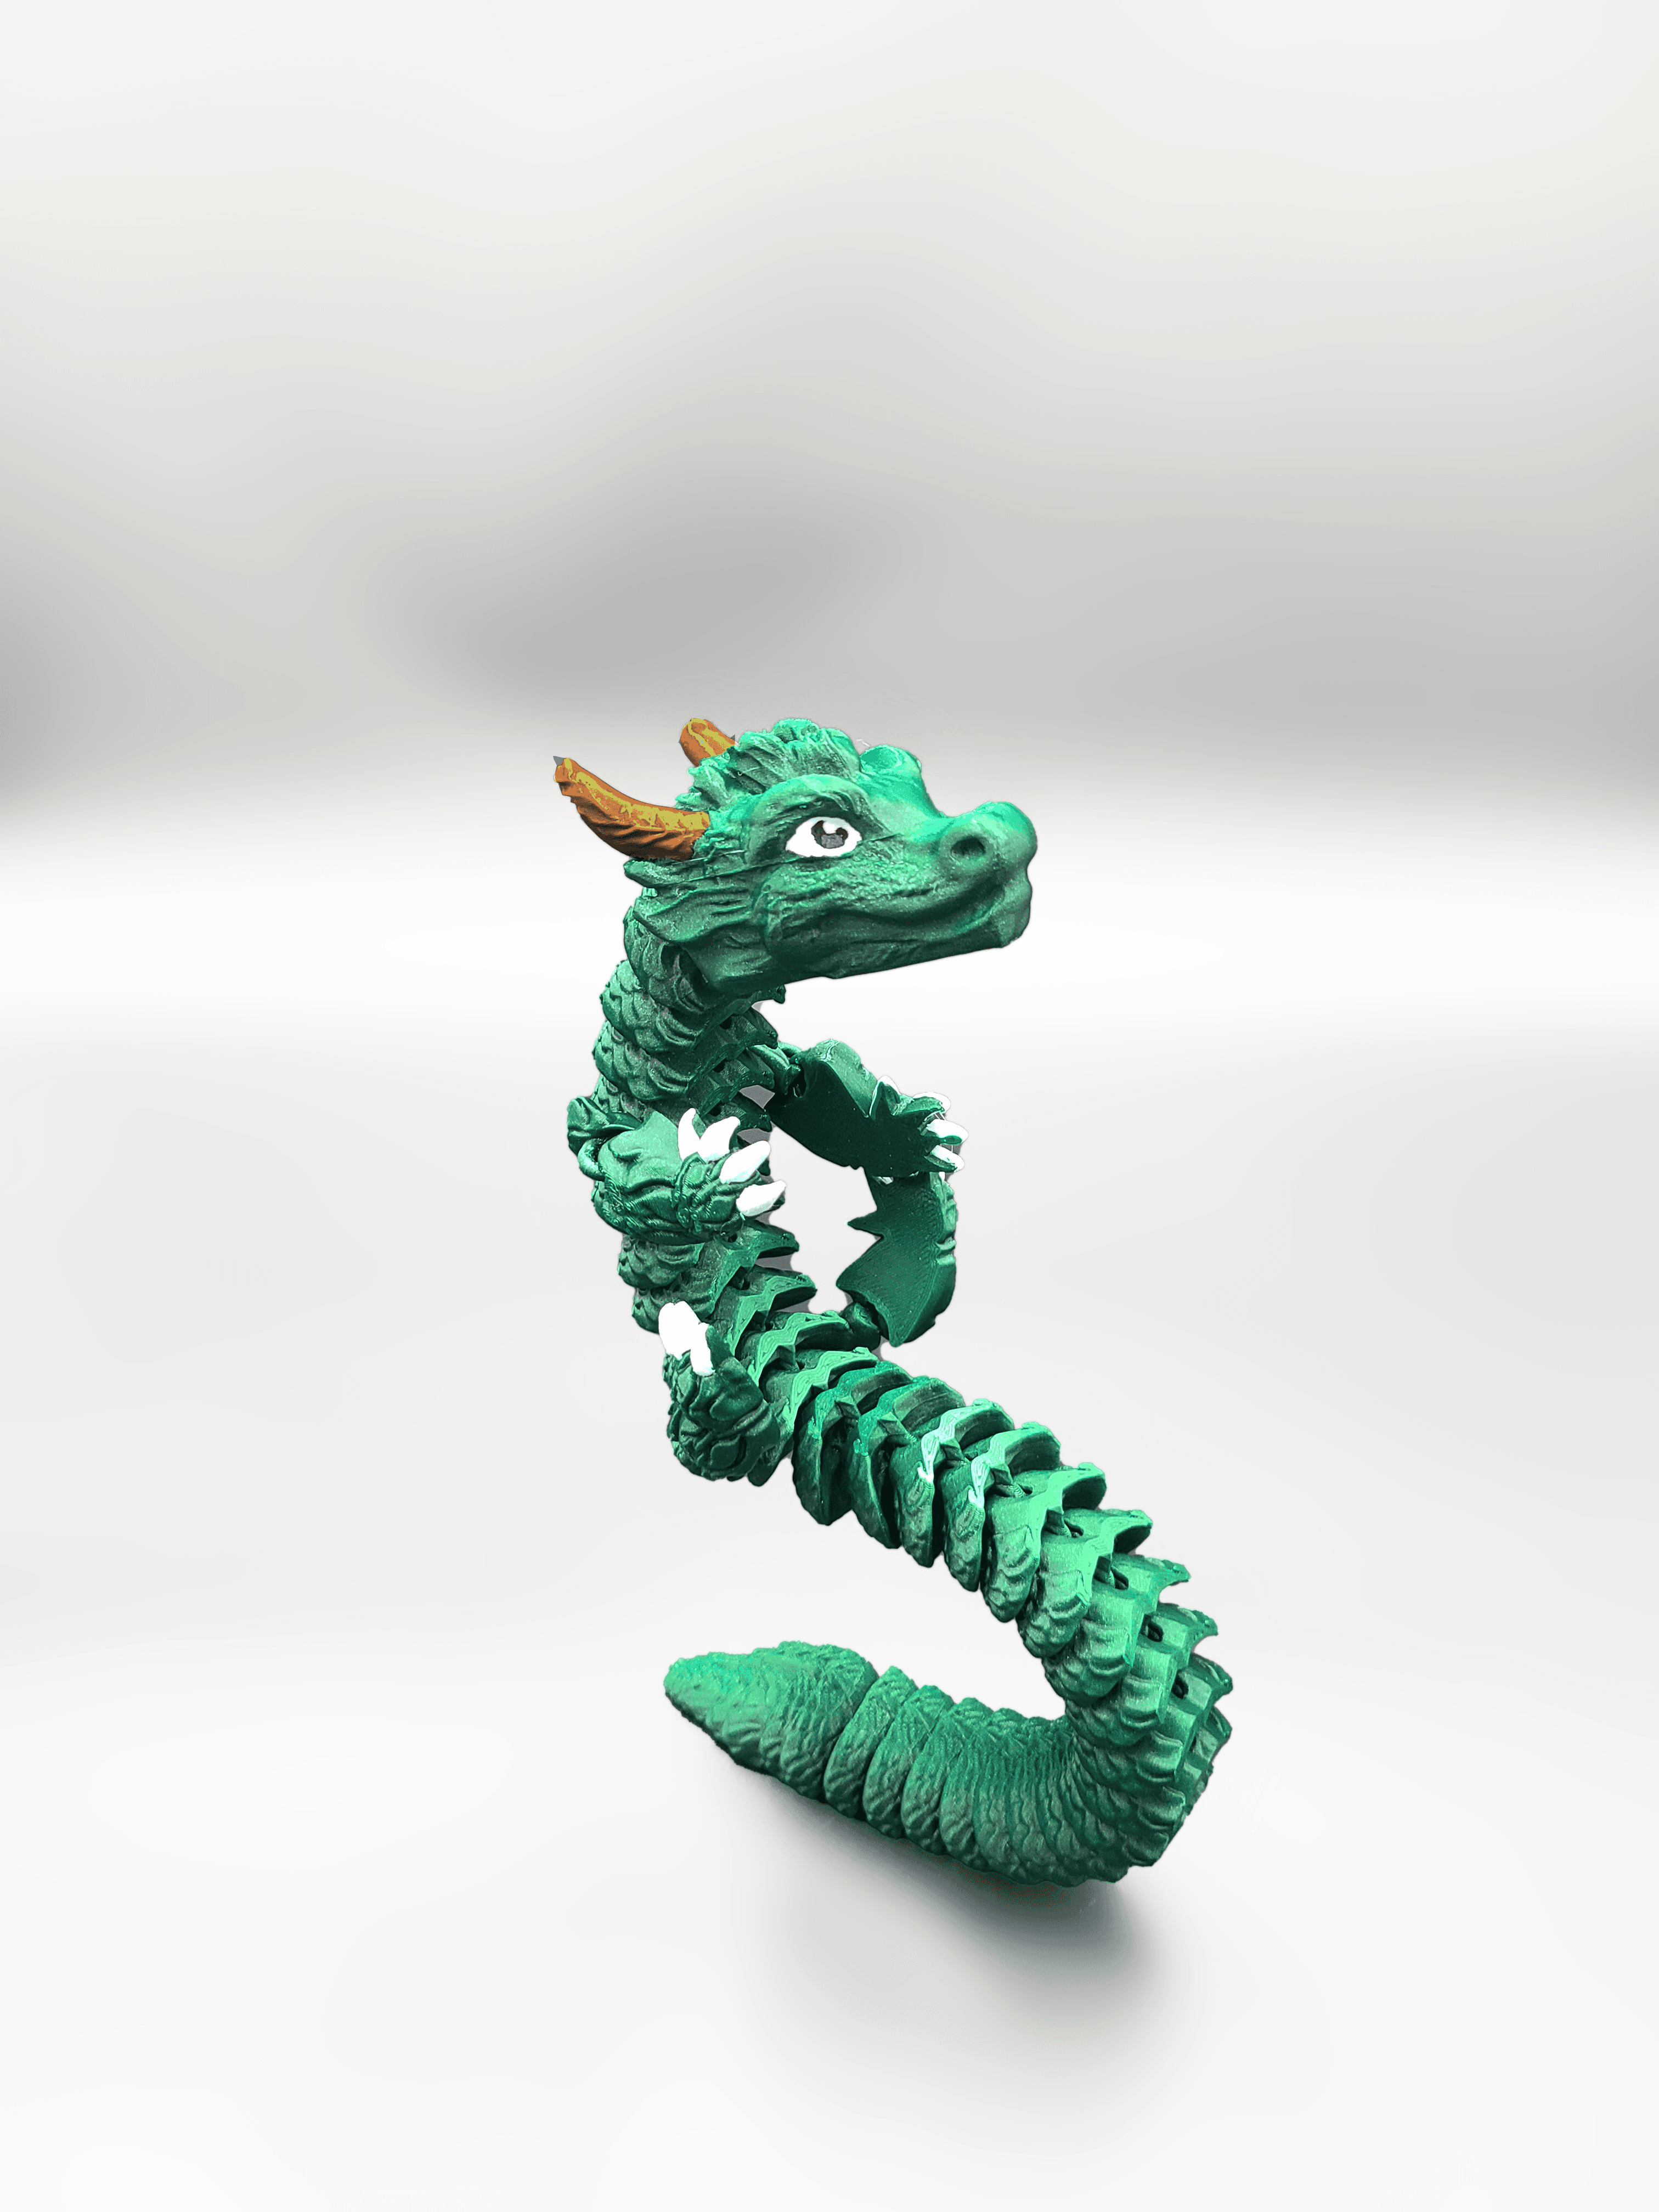 The Best Articulated Dragon Models - Flexible Print in Place for 3D Printing